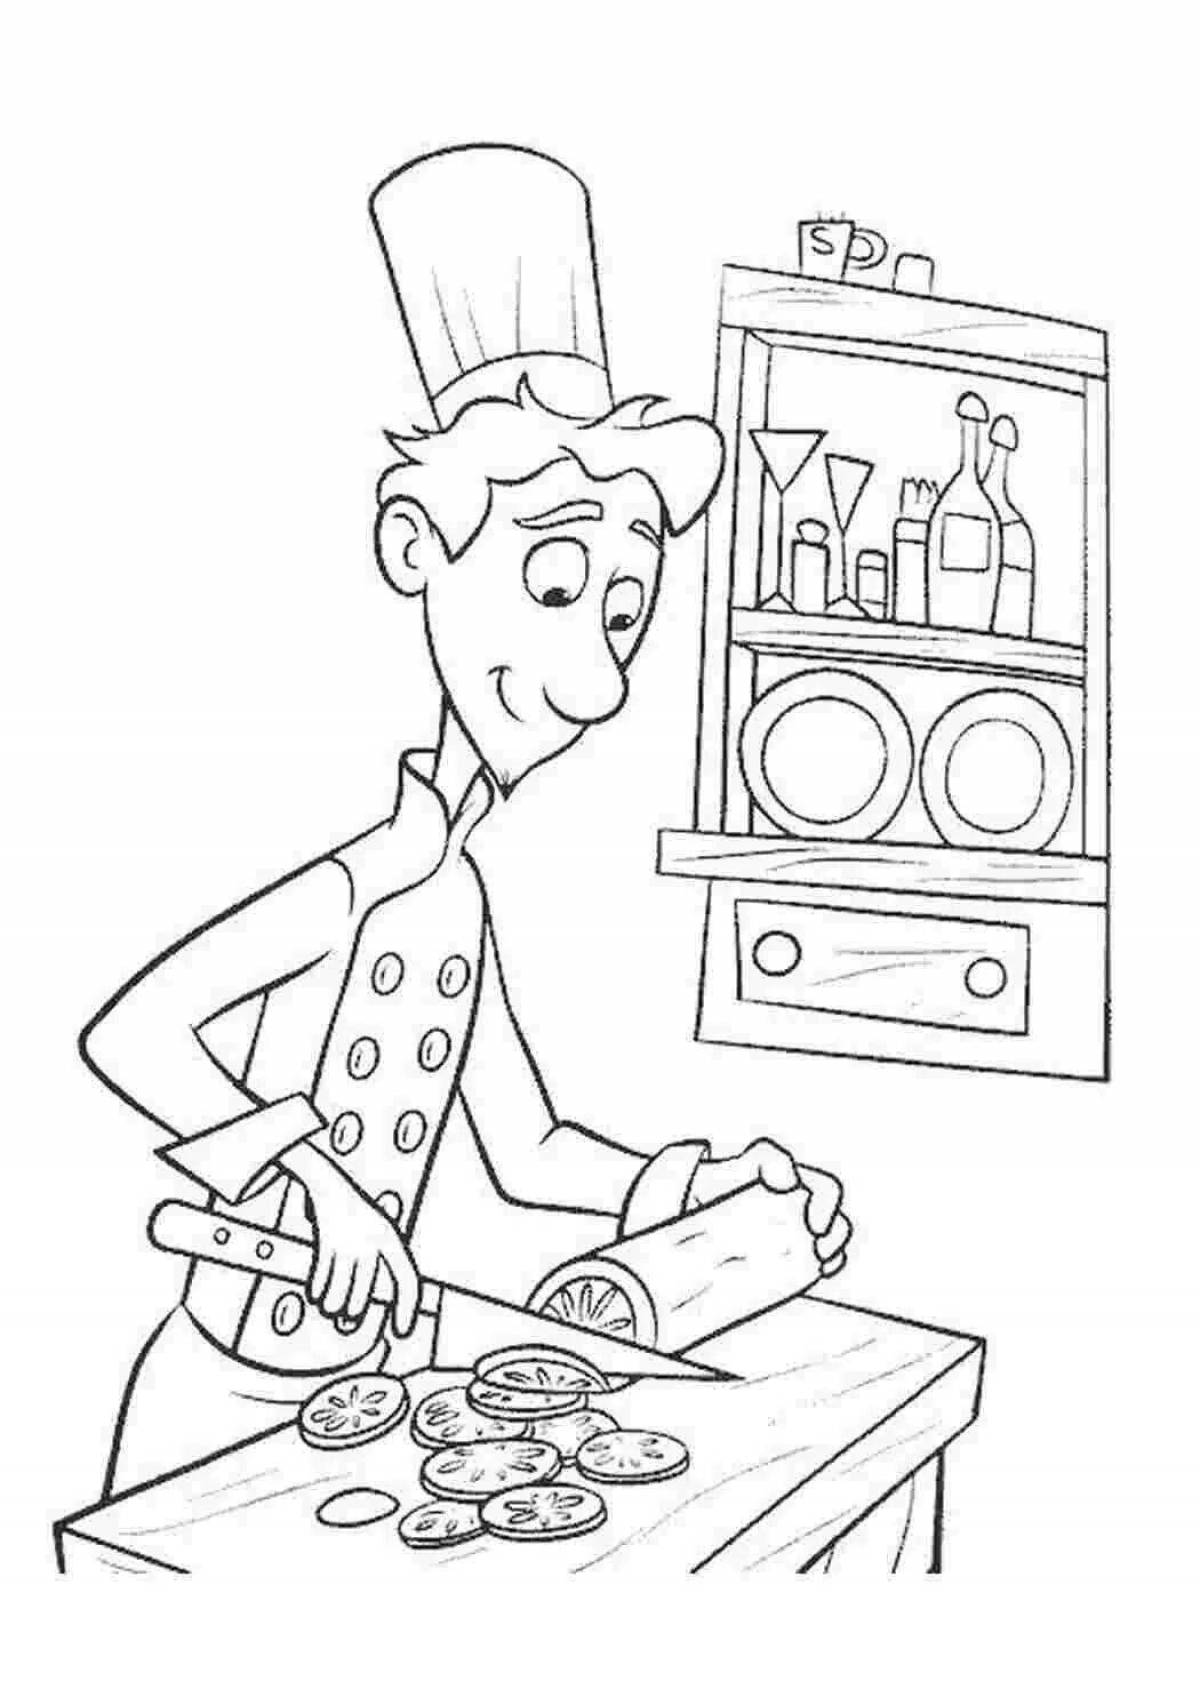 Cook profession coloring page